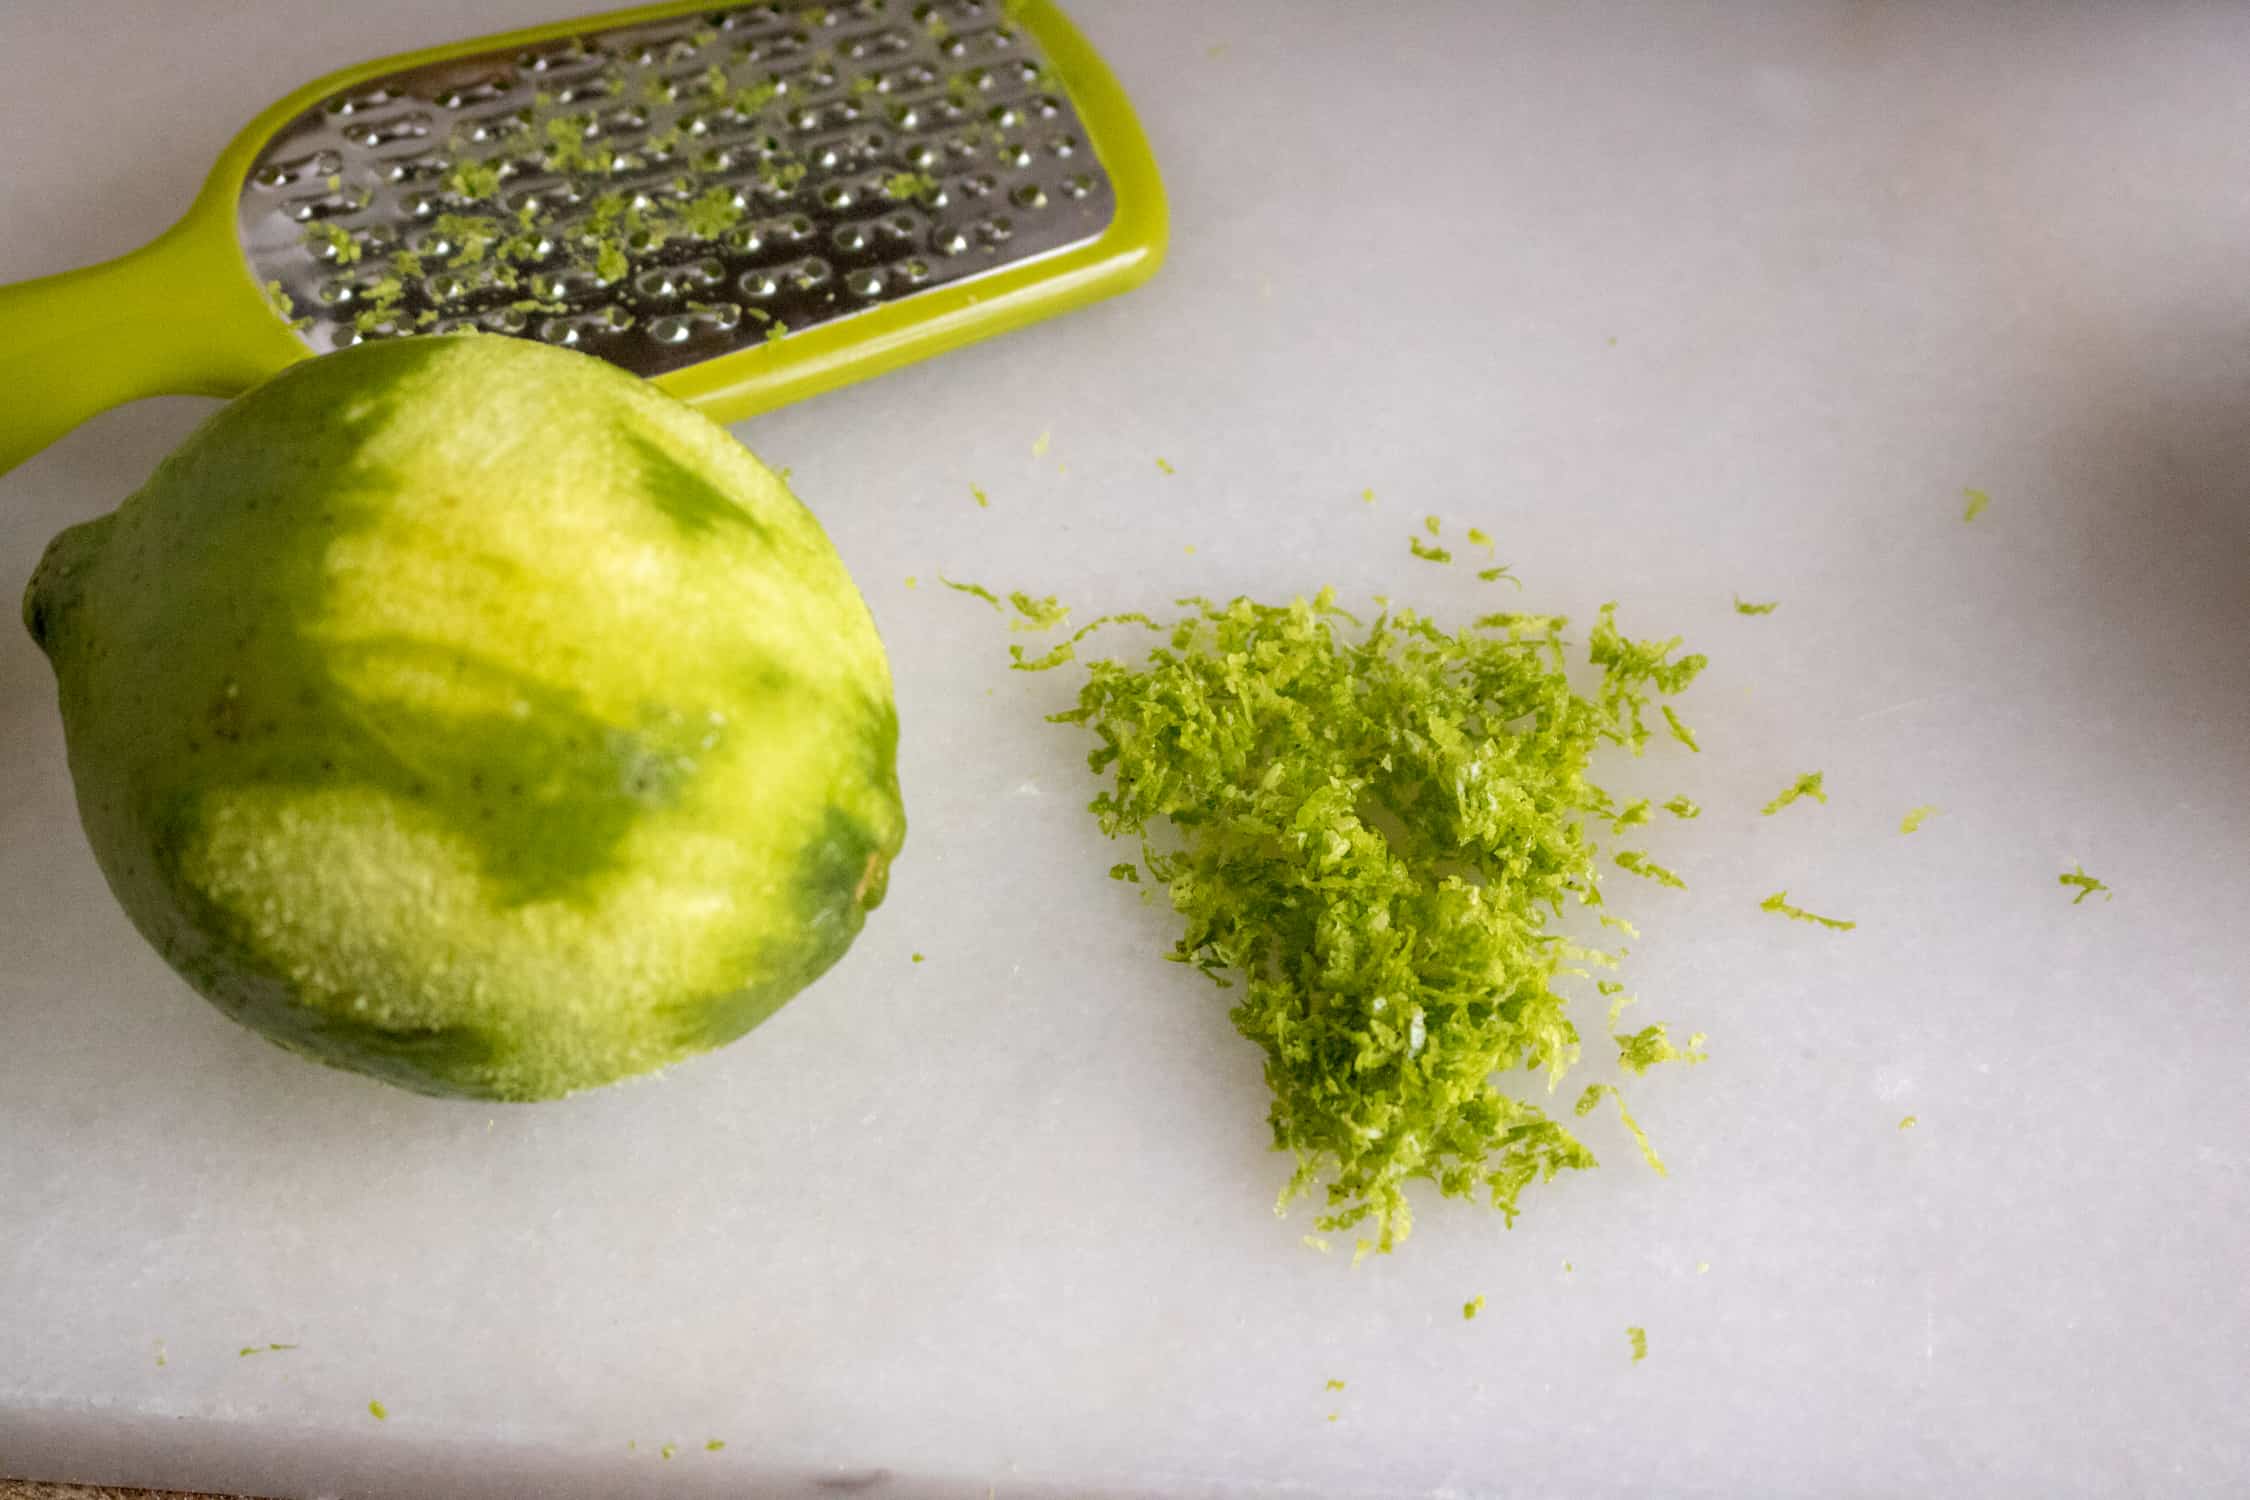 Zest grater beside a lime with zest removed and a pike of lime zest on a work surface